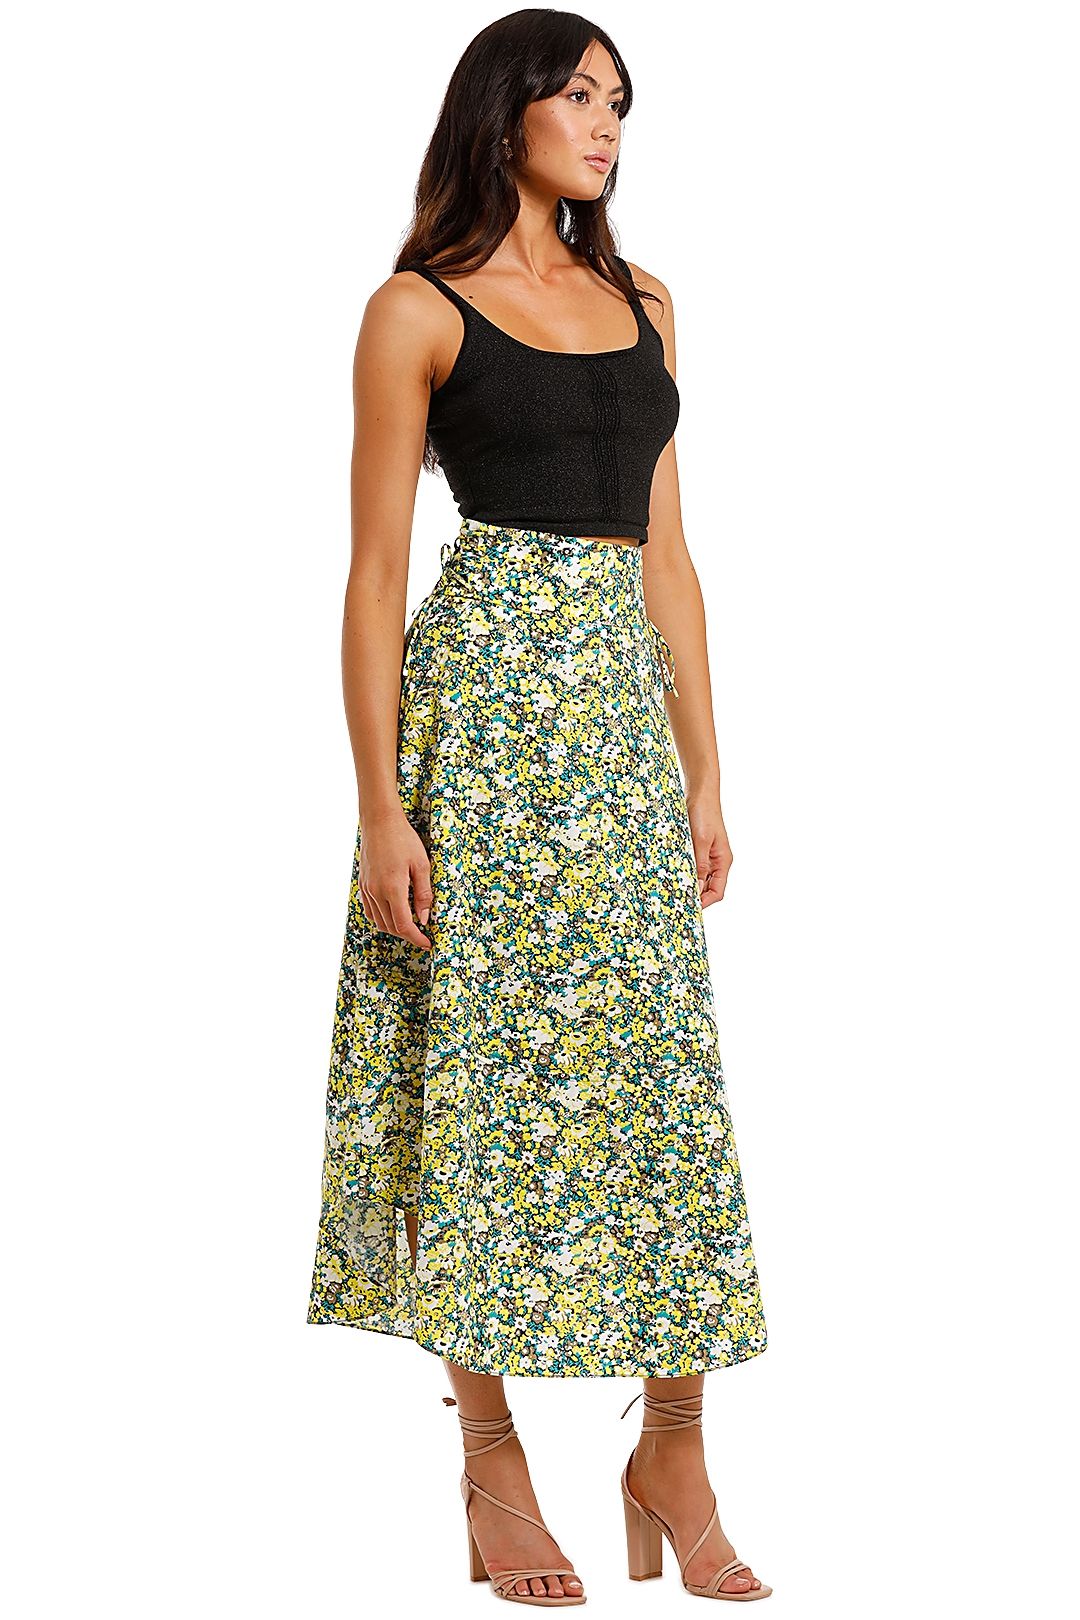 C&M Camilla And Marc Ditzy Print Skirt Green